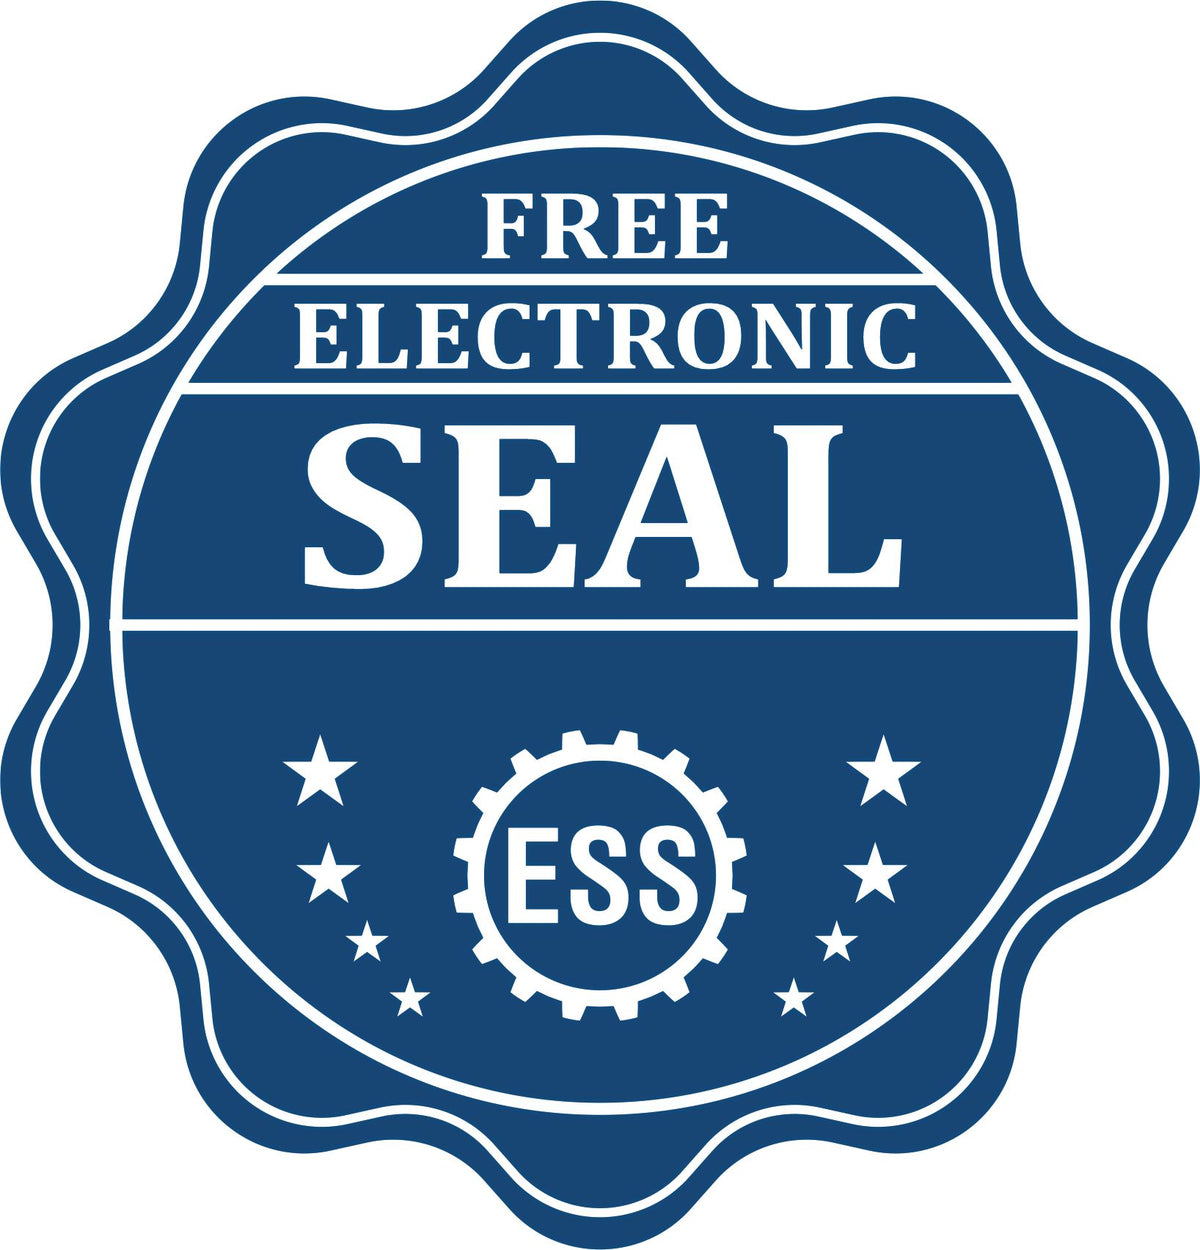 A badge showing a free electronic seal for the State of Maine Long Reach Architectural Embossing Seal with stars and the ESS gear on the emblem.